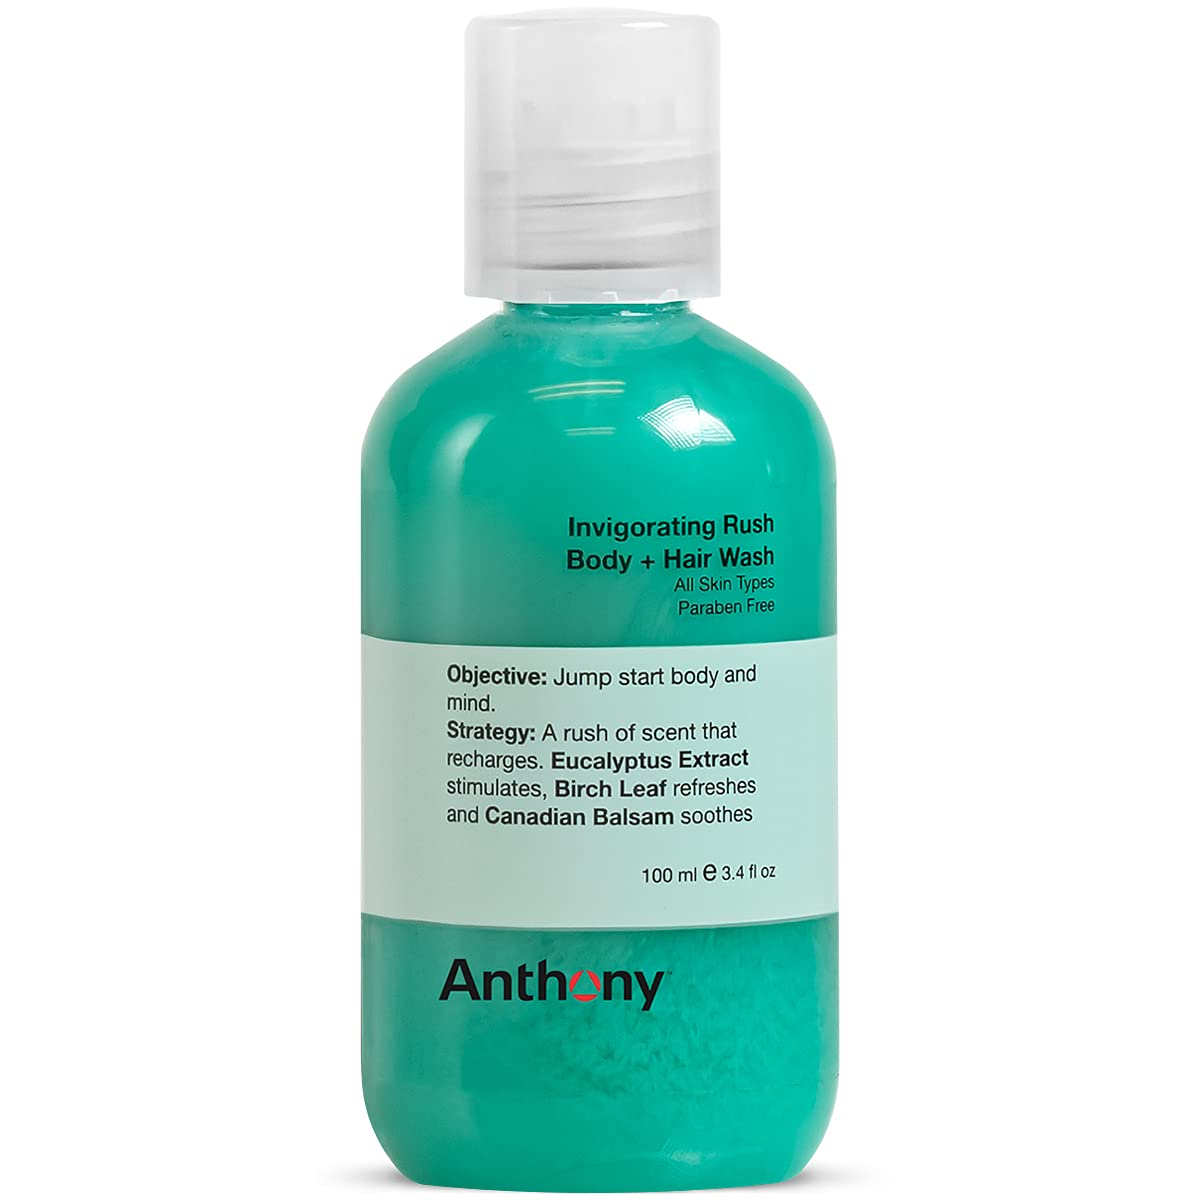 Anthony Mens Body Wash and Shampoo: Invigorating Rush 2-In-1 Liquid Gel Soap & Hair Shampoo – Pine Wood Scent Contains Eucalyptus Extract, Canadian Balsam & Birch Leaf 3.4 Fl. Oz